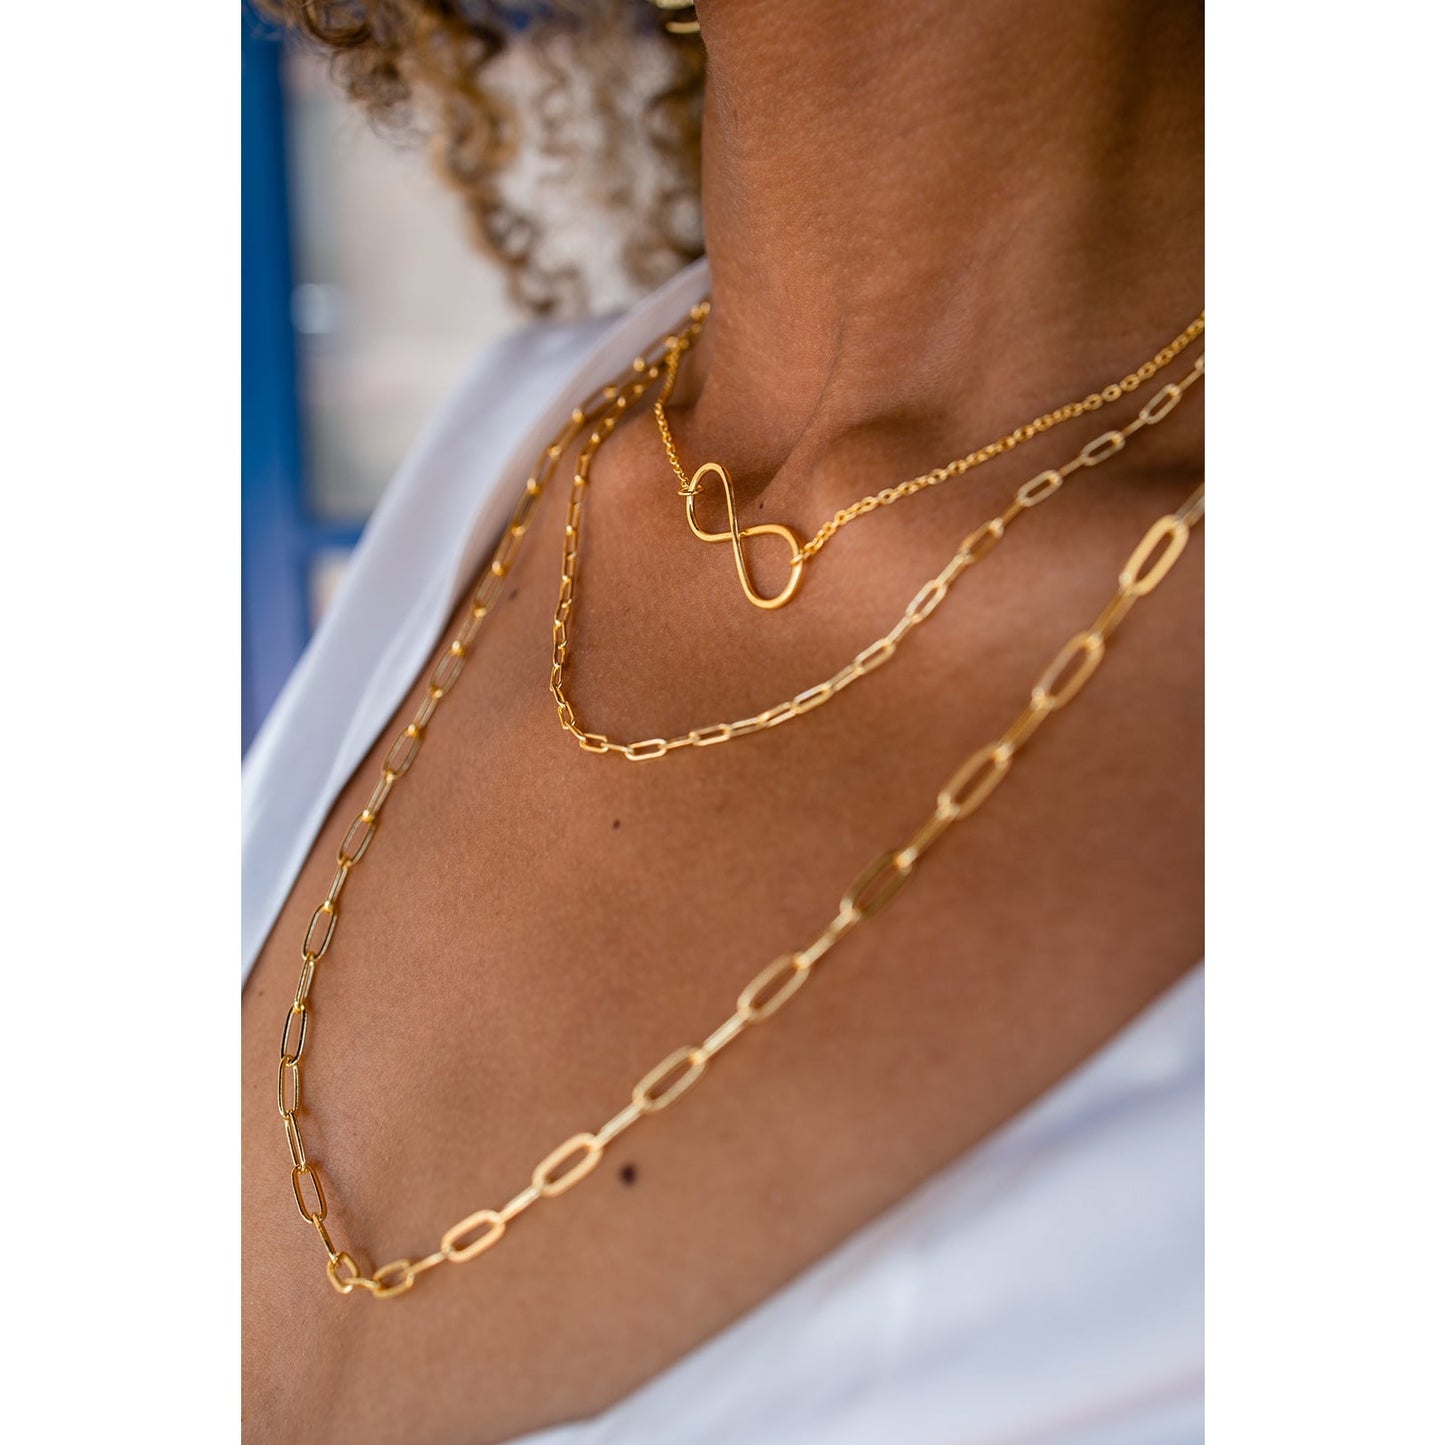 PURPOSE Jewelry - Swing Paperclip Necklace